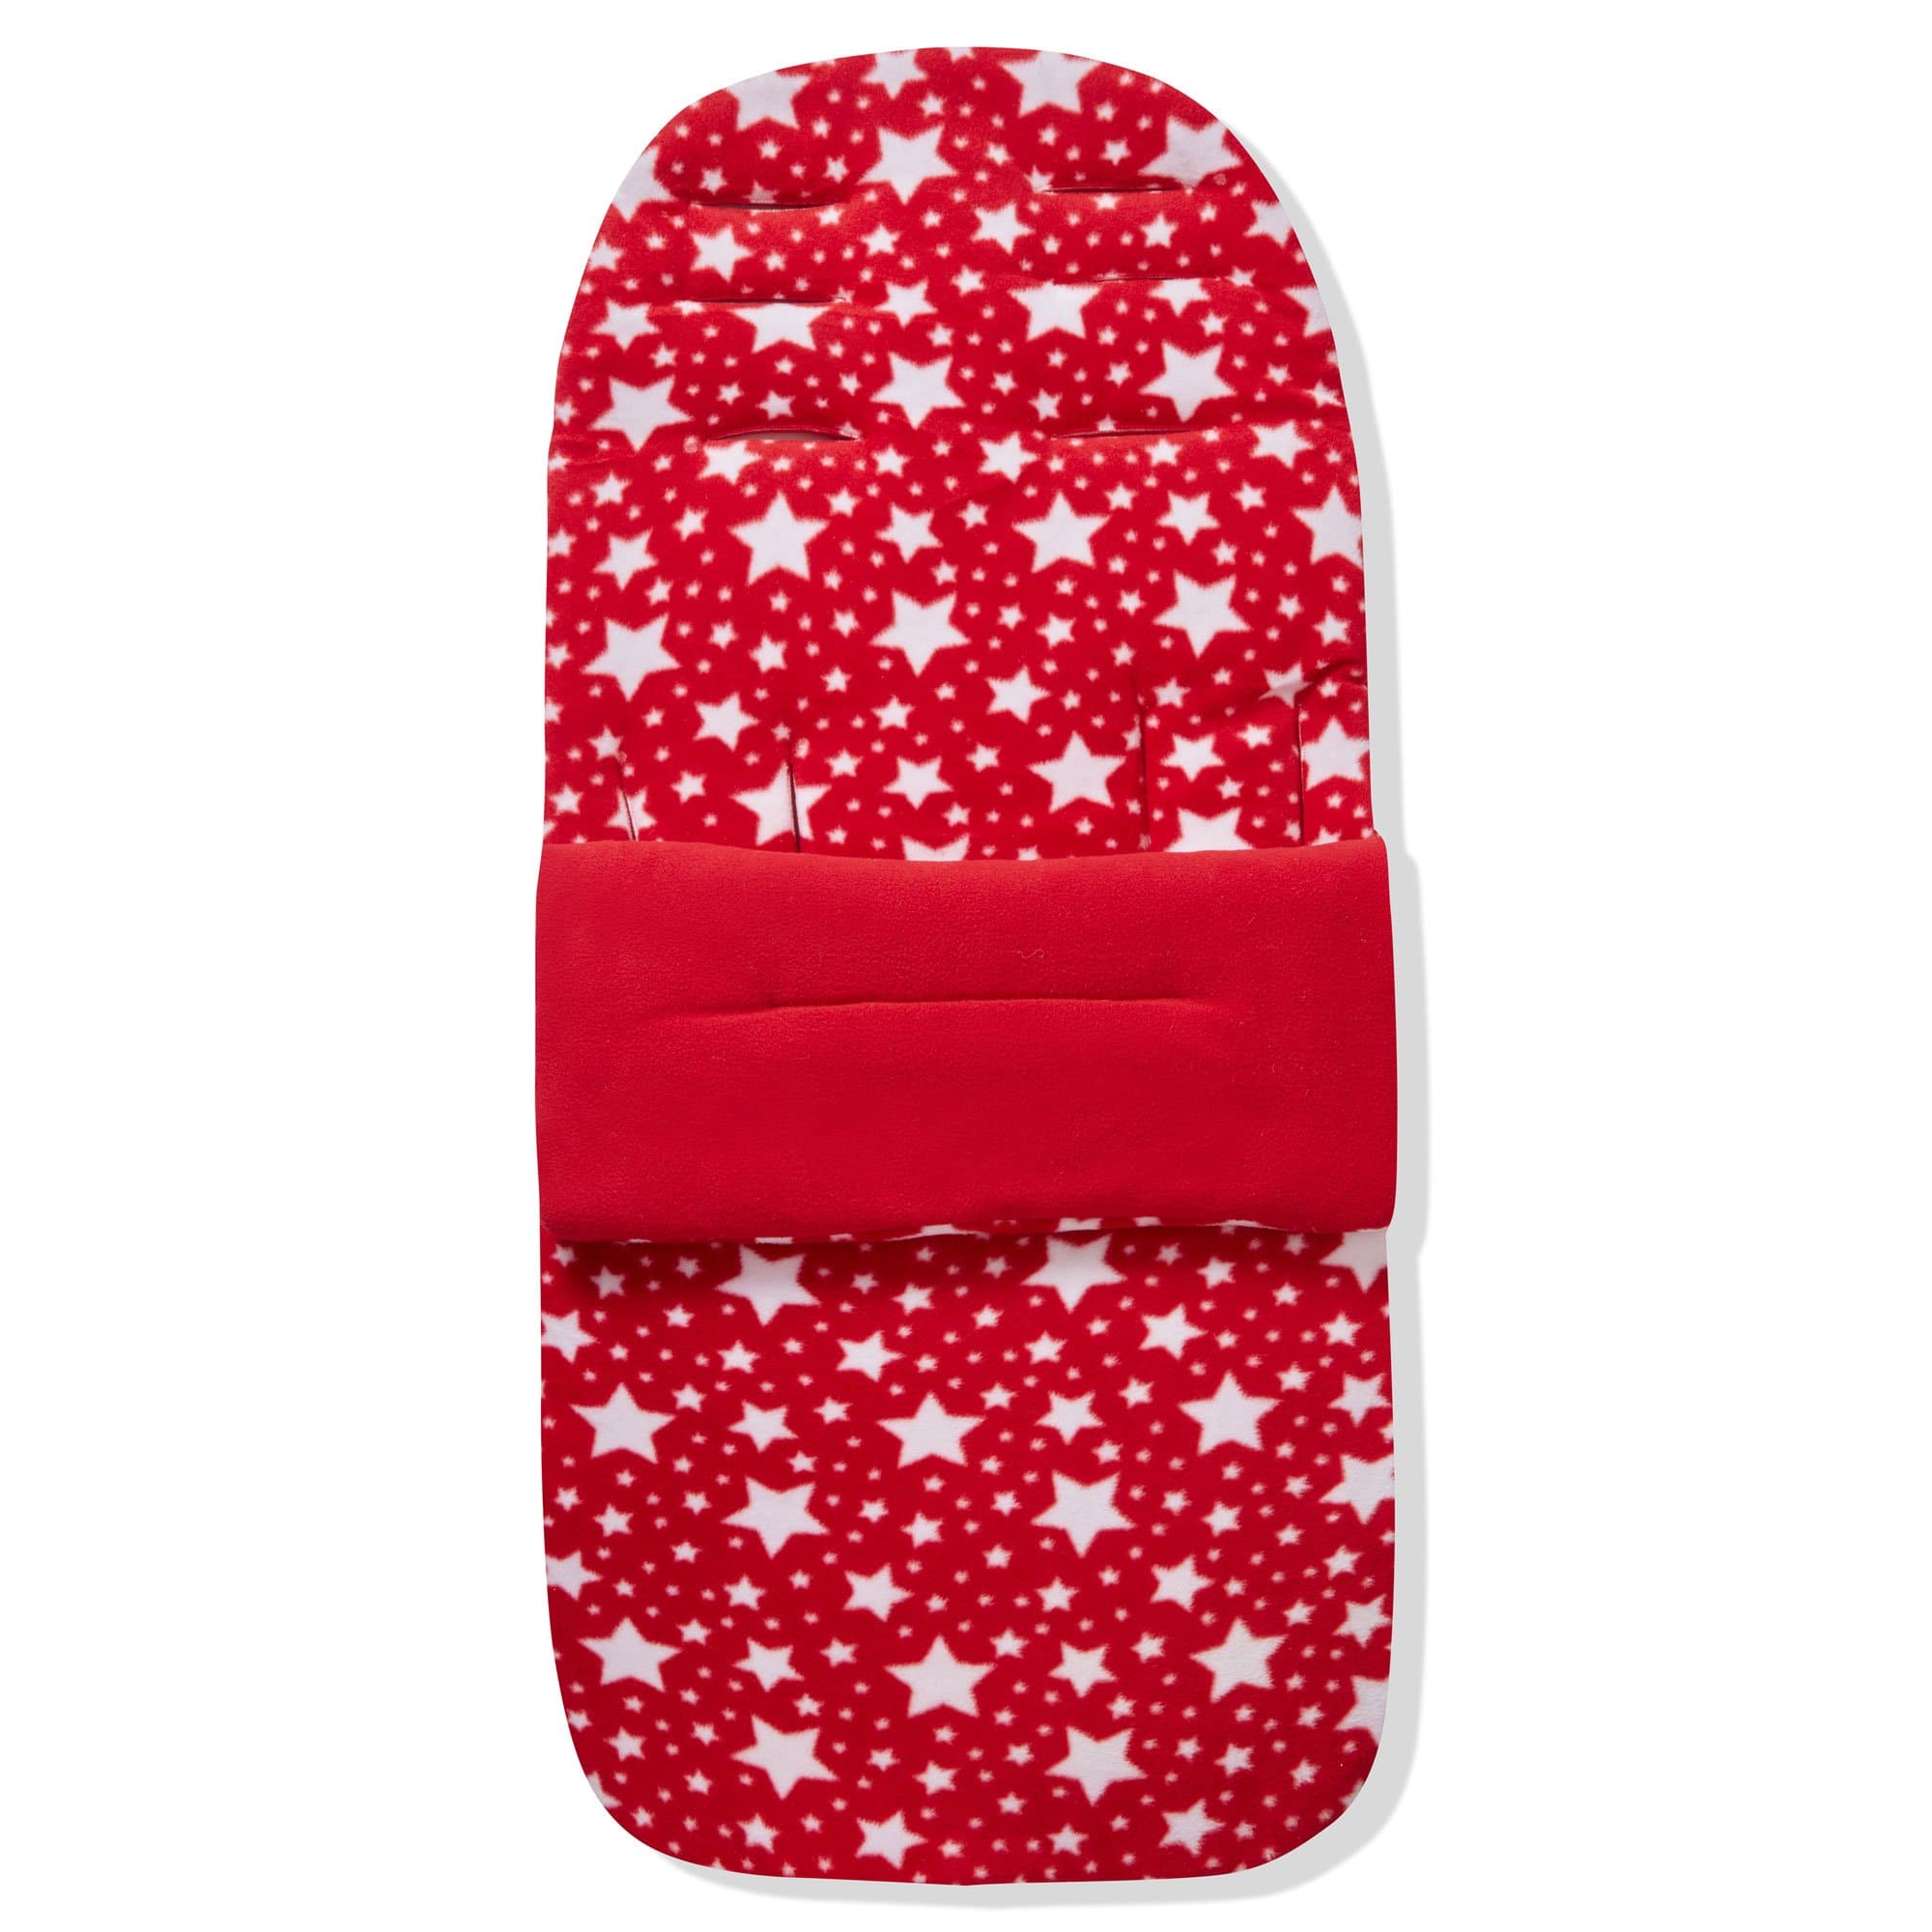 Fleece Footmuff / Cosy Toes Compatible with Esprit - Red Star / Fits All Models | For Your Little One